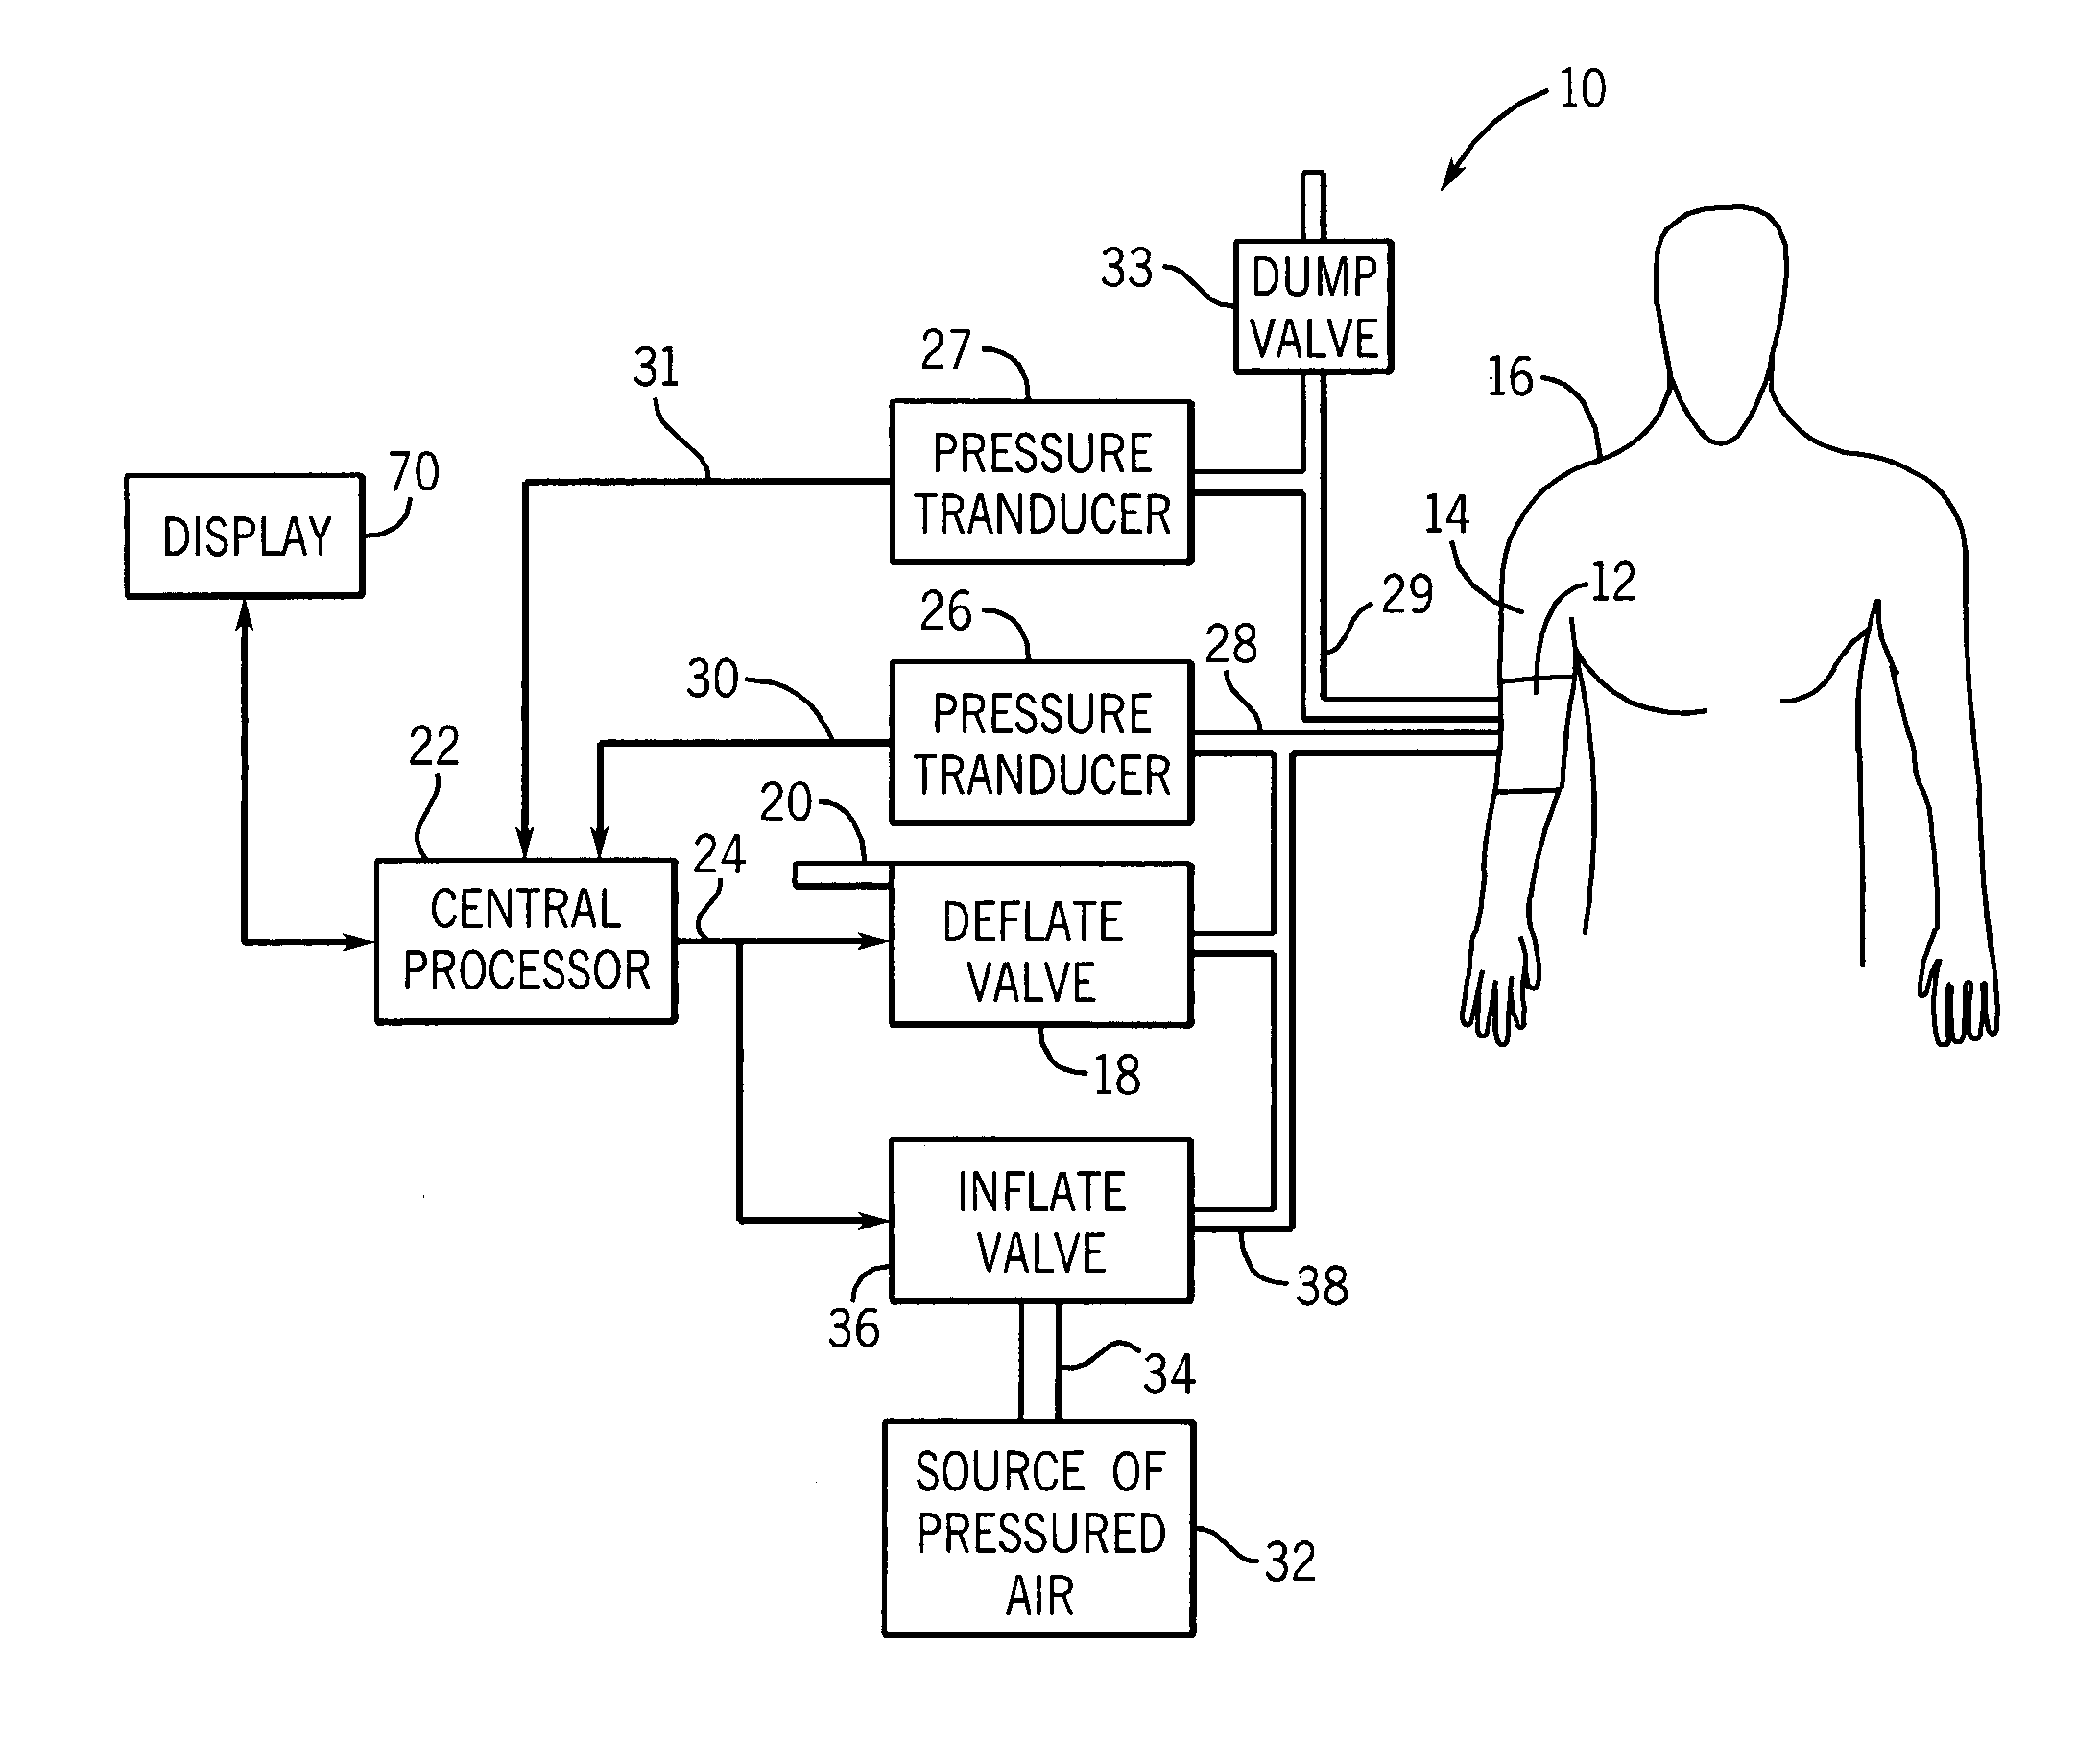 Method and system for estimation of blood pressure during cuff inflation